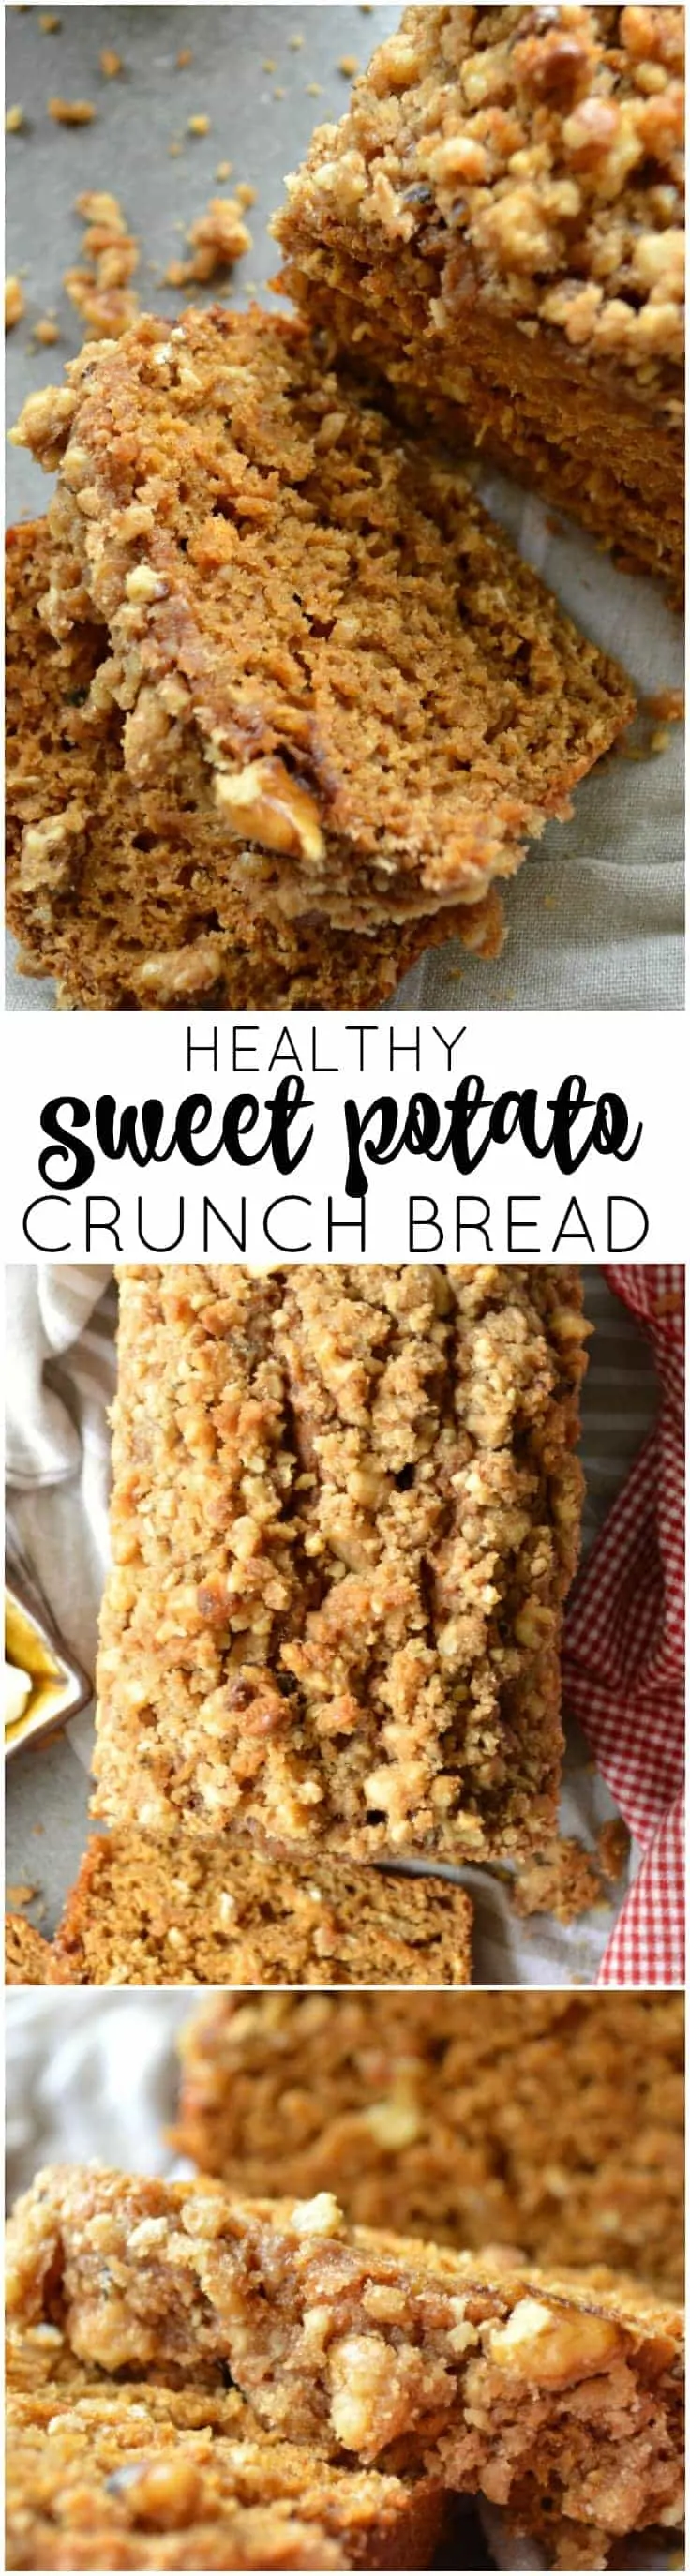 This Healthy Sweet Potato Crunch Bread uses unsweetened applesauce and mashed sweet potatoes for a wholesome treat that will satisfy your sweet tooth!